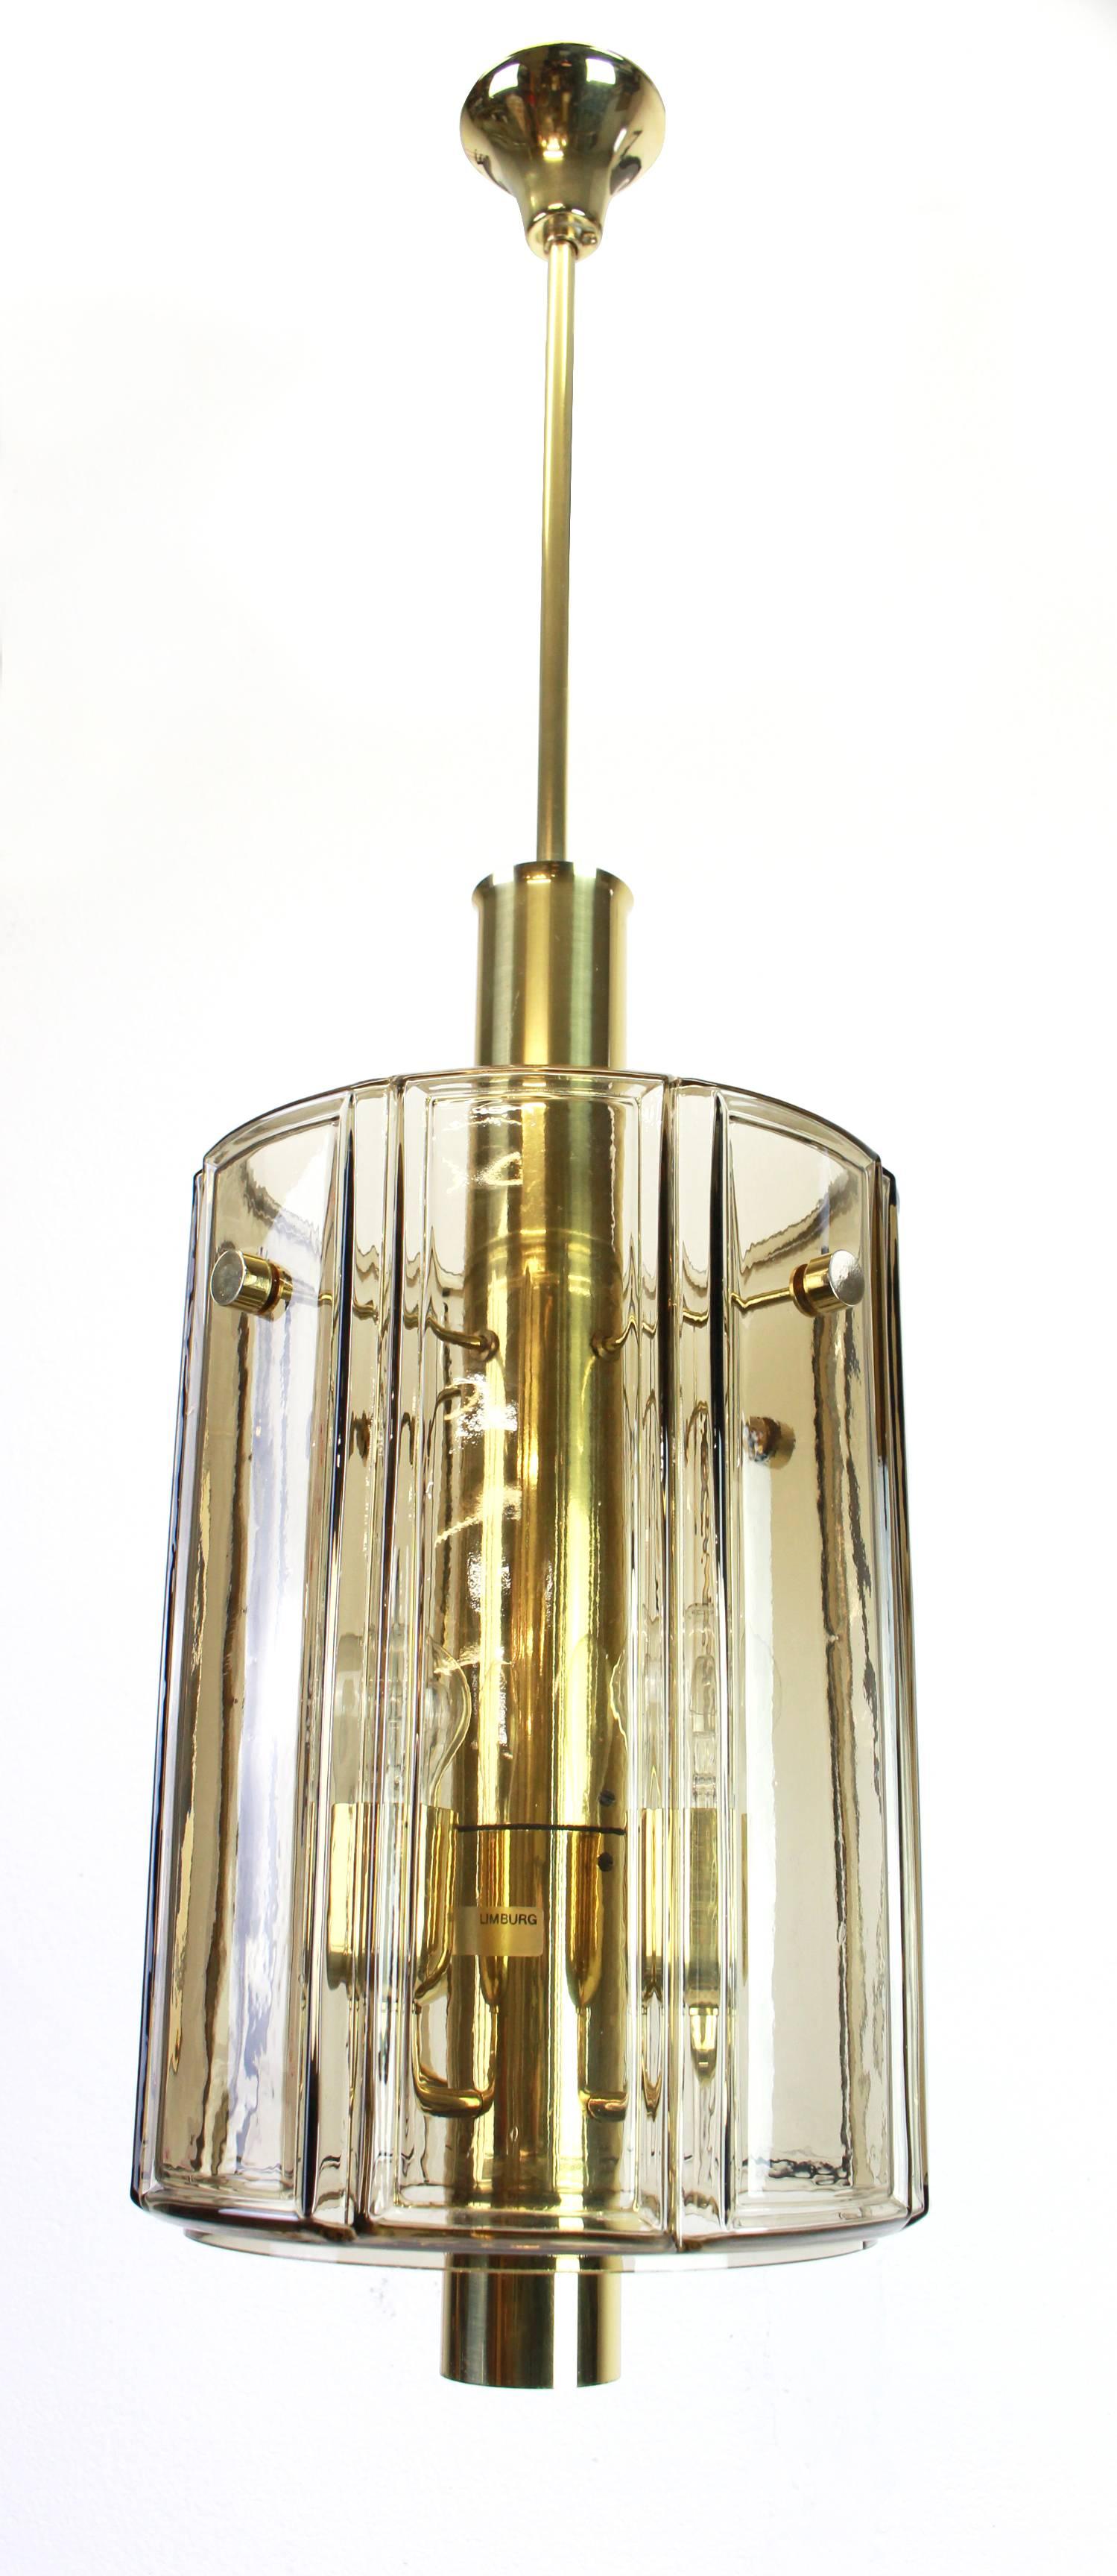 Mid-20th Century Brass Lantern Form Pendant with Smoked Glass Panels by Limburg, Germany, 1960s